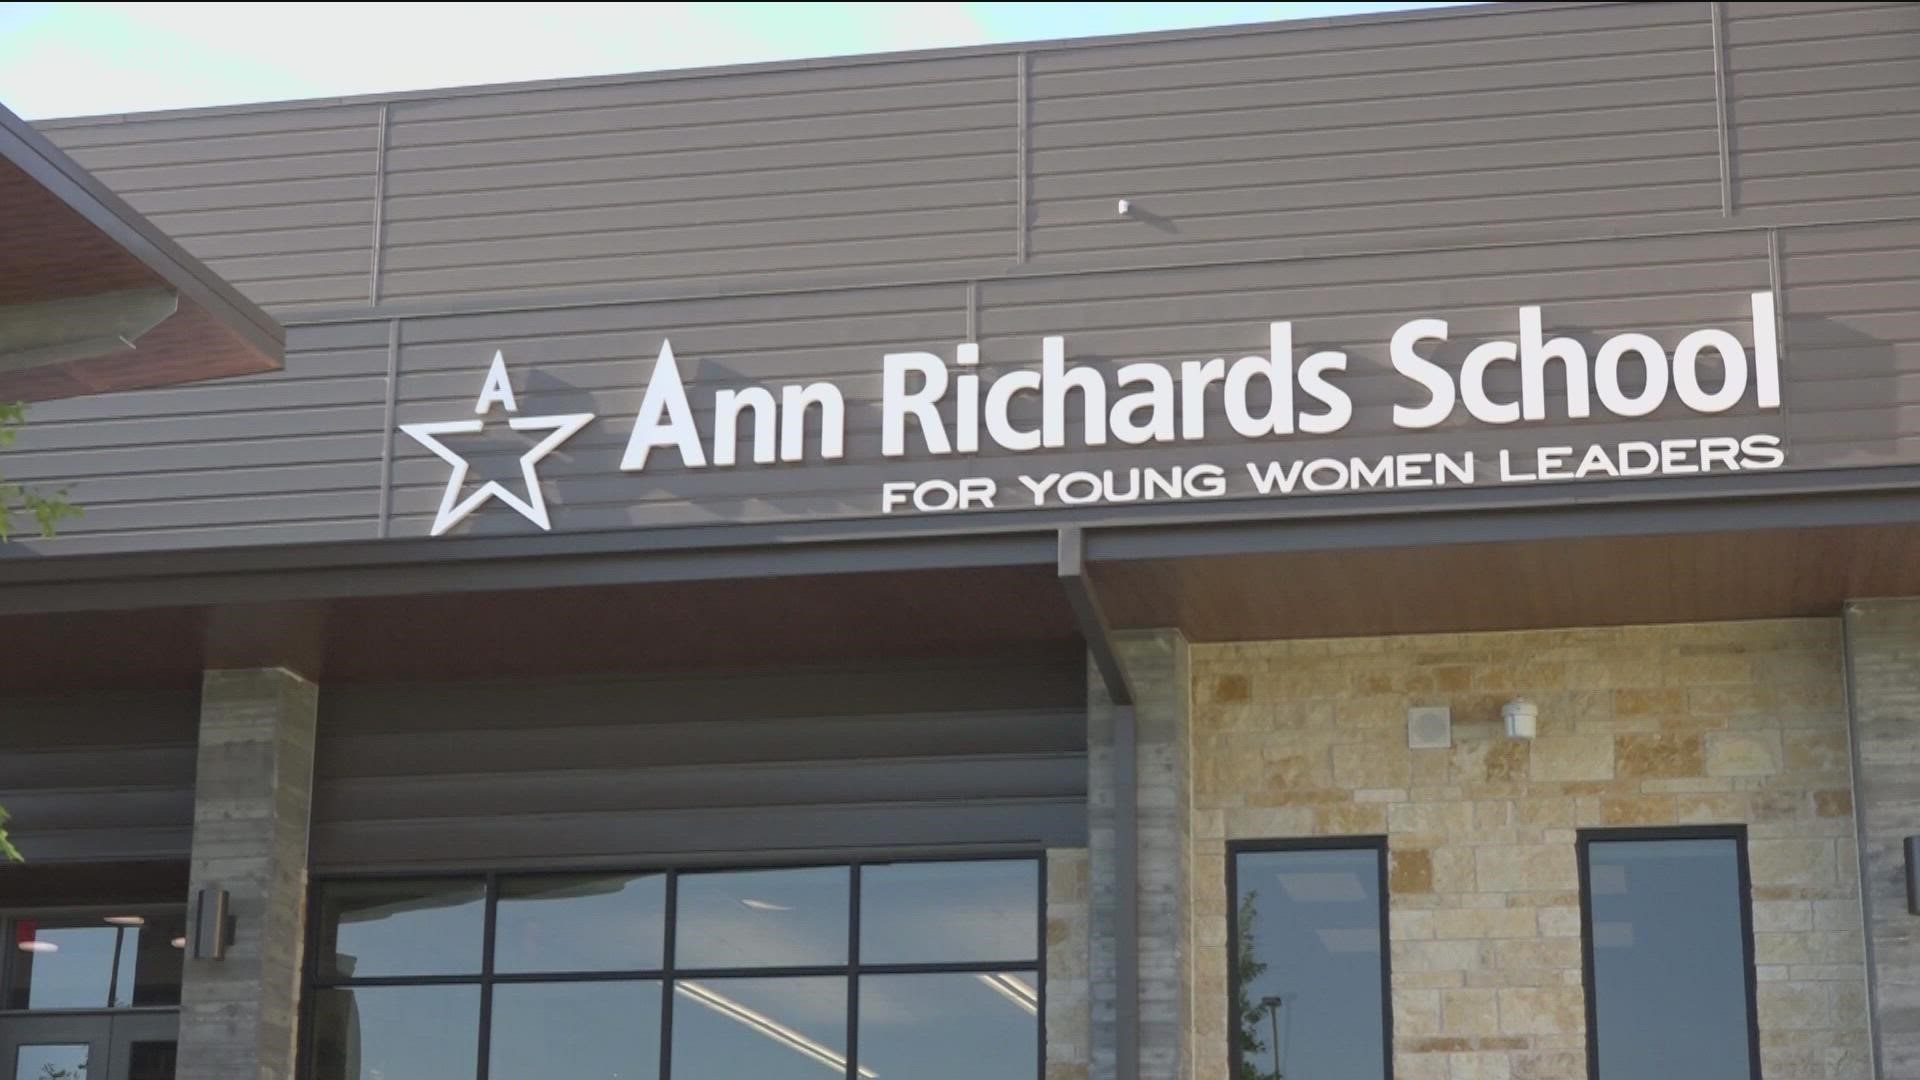 The Ann Richards School for Young Women Leaders in Austin puts a focus on building its students up so they can make change in the future.